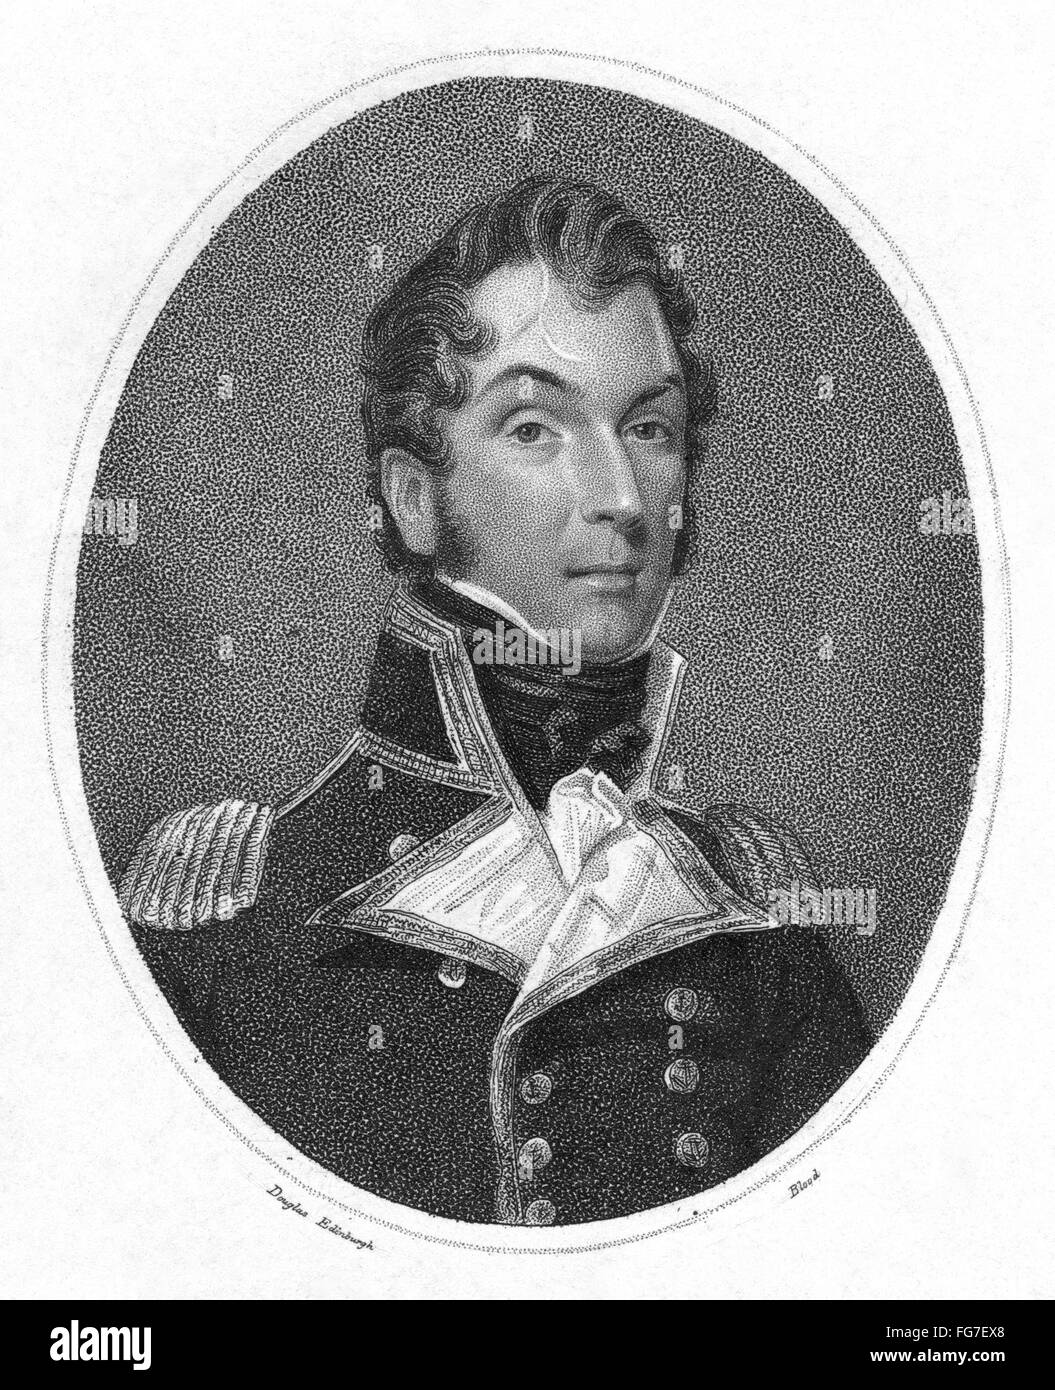 WILLIAM CAVENDISH. /nCunningham Dalyell, 7th Baronet of the Binns (1787-1865). Scottish nobleman and naval captain. Aquatint engraving published in London, 1814. Stock Photo